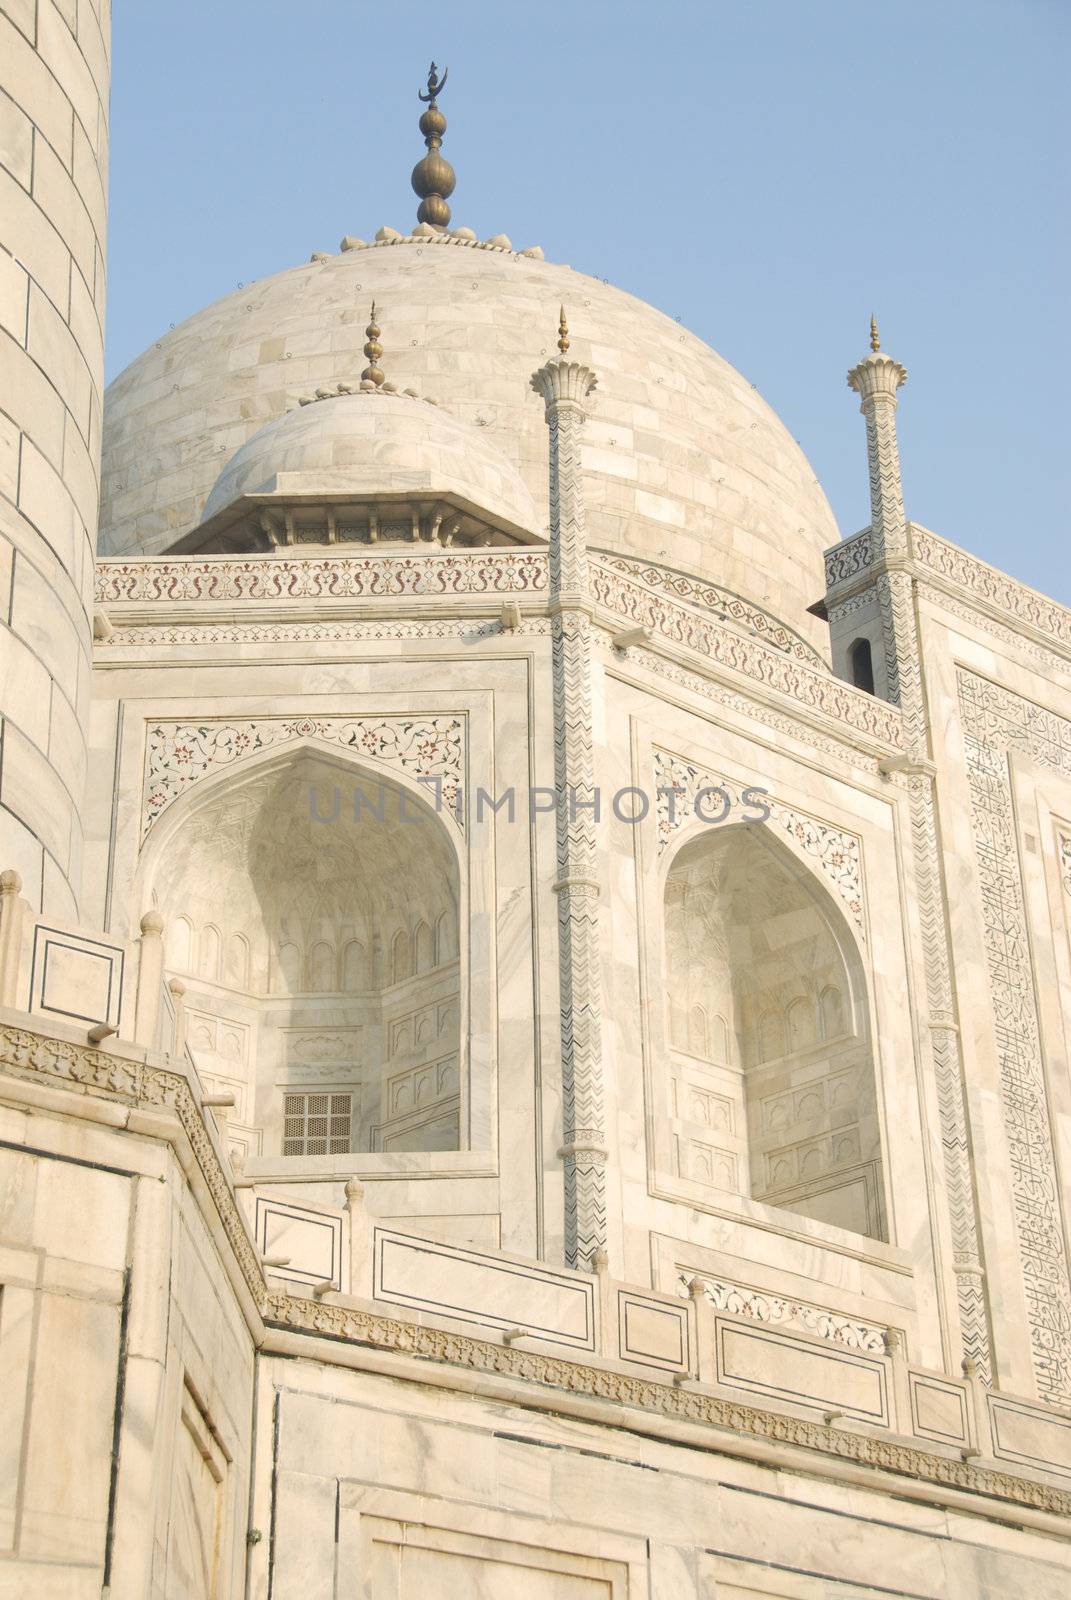 Upward Point of view of the Taj Mahal mausoleum in Agra, India showing the the primary dome as well as a corner dome and the edge of the minaret to form a side border